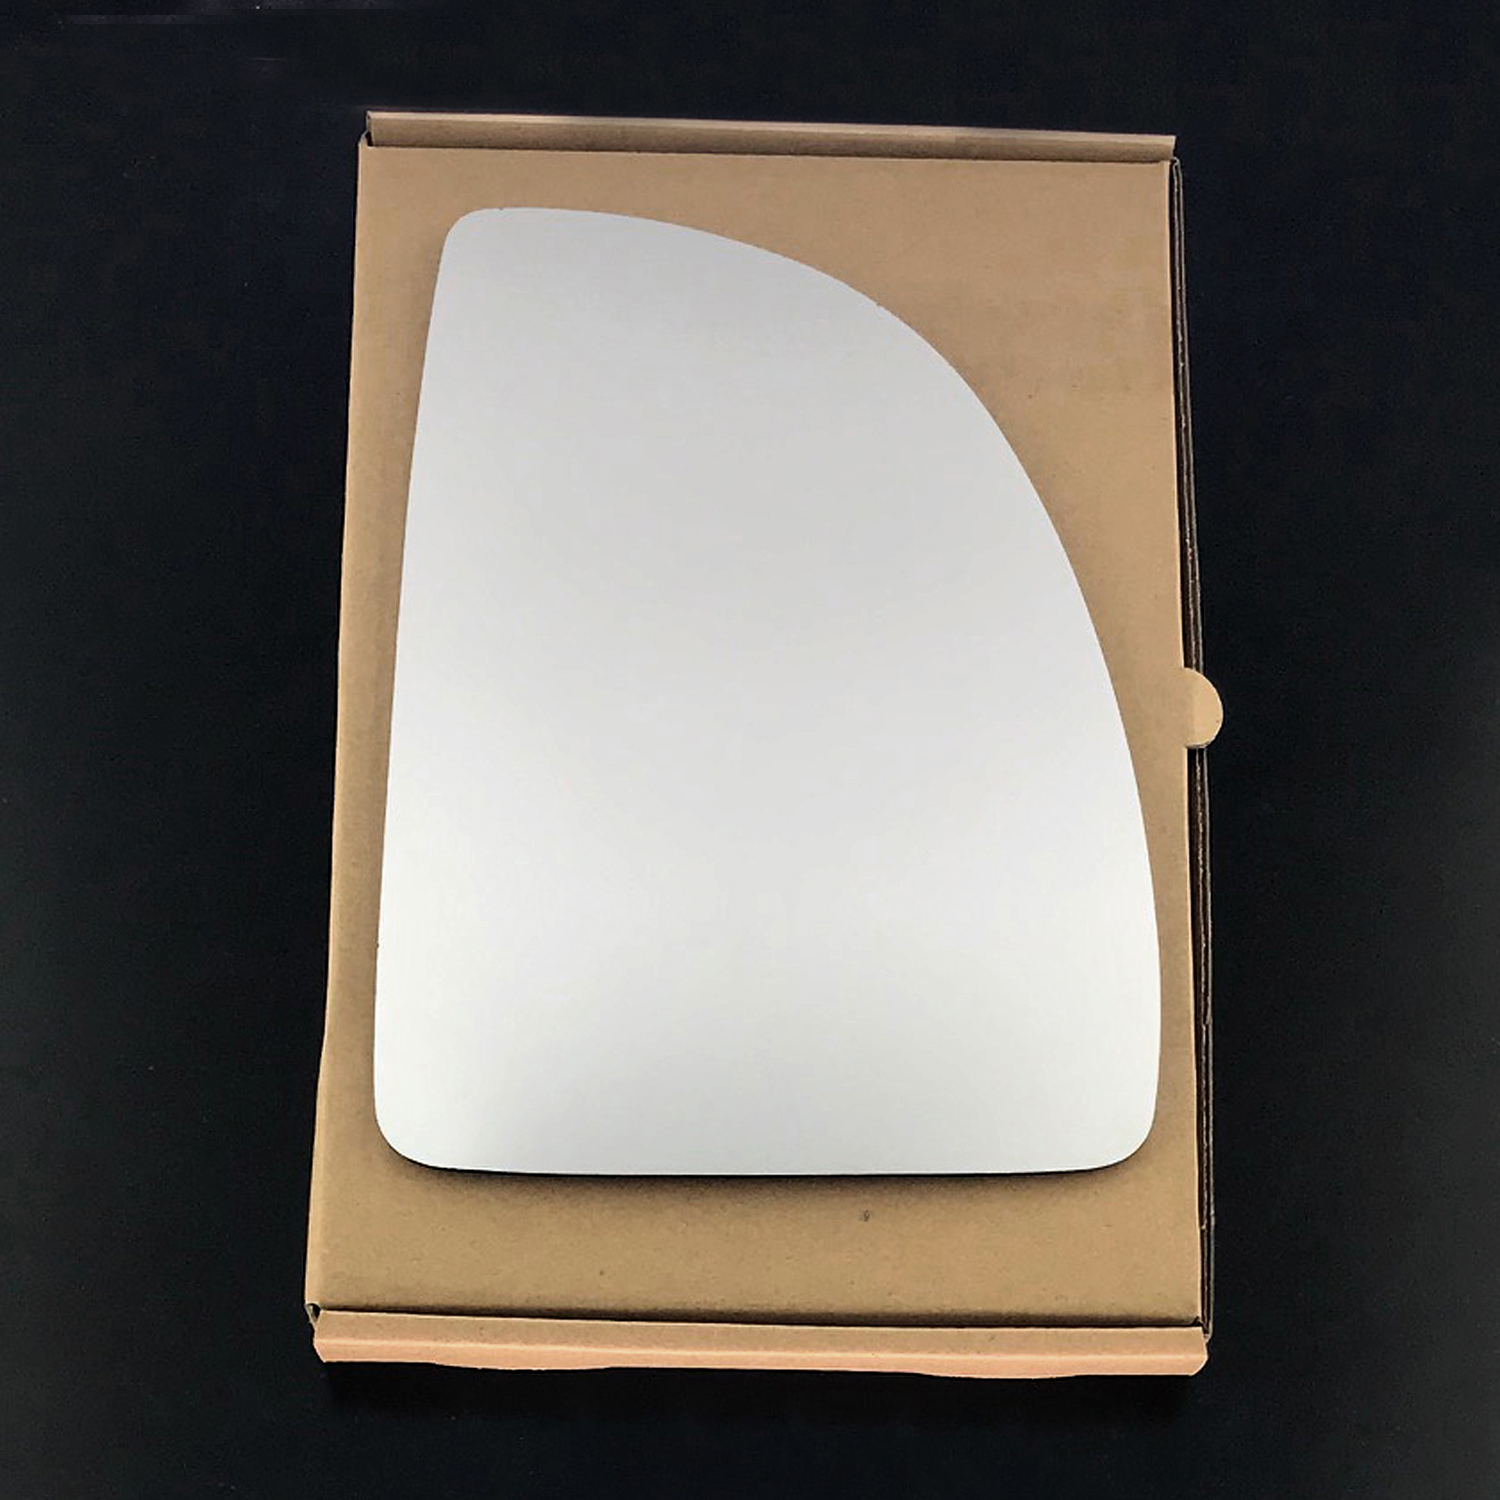 Peugeot Boxer Wing Mirror Glass RIGHT HAND ( UK Driver Side ) 1999 to 2005 – Convex Wing Mirror